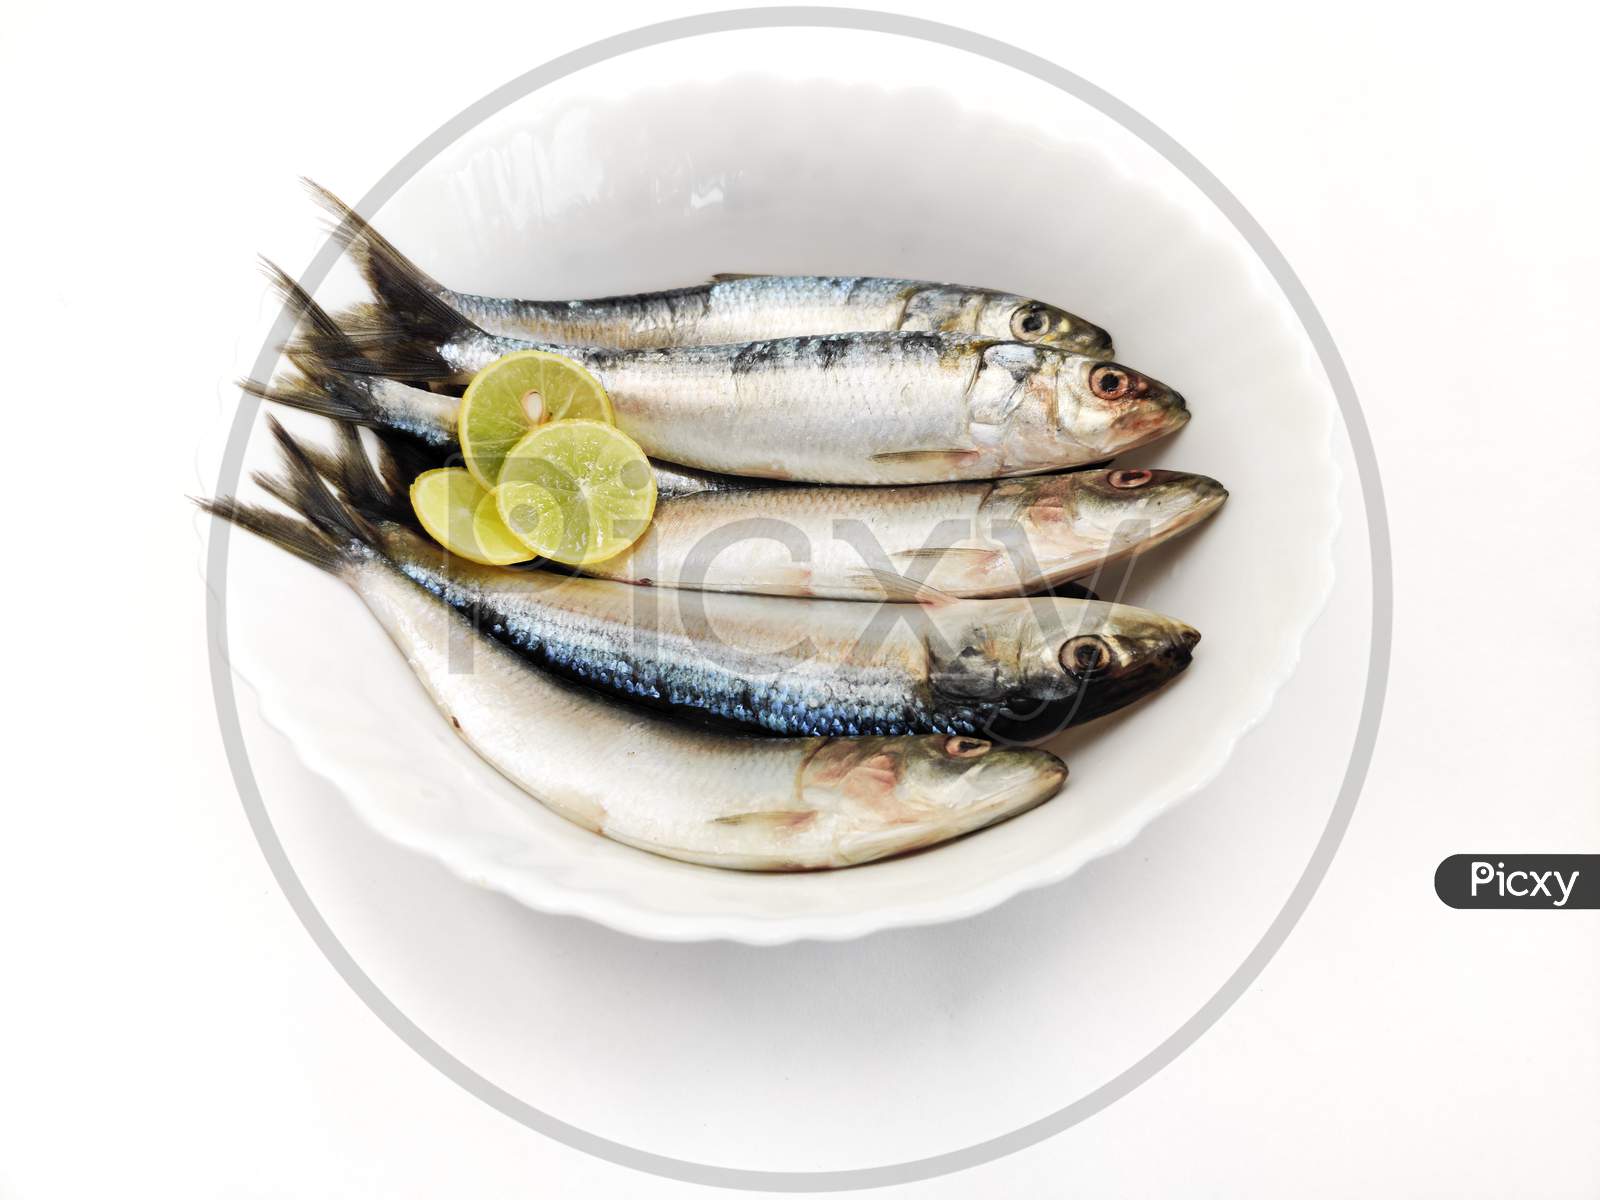 Close Up View Of Fresh Indian Oil Sardine On A White Pot,Decorated With Herbs And Vegetables.White Background.